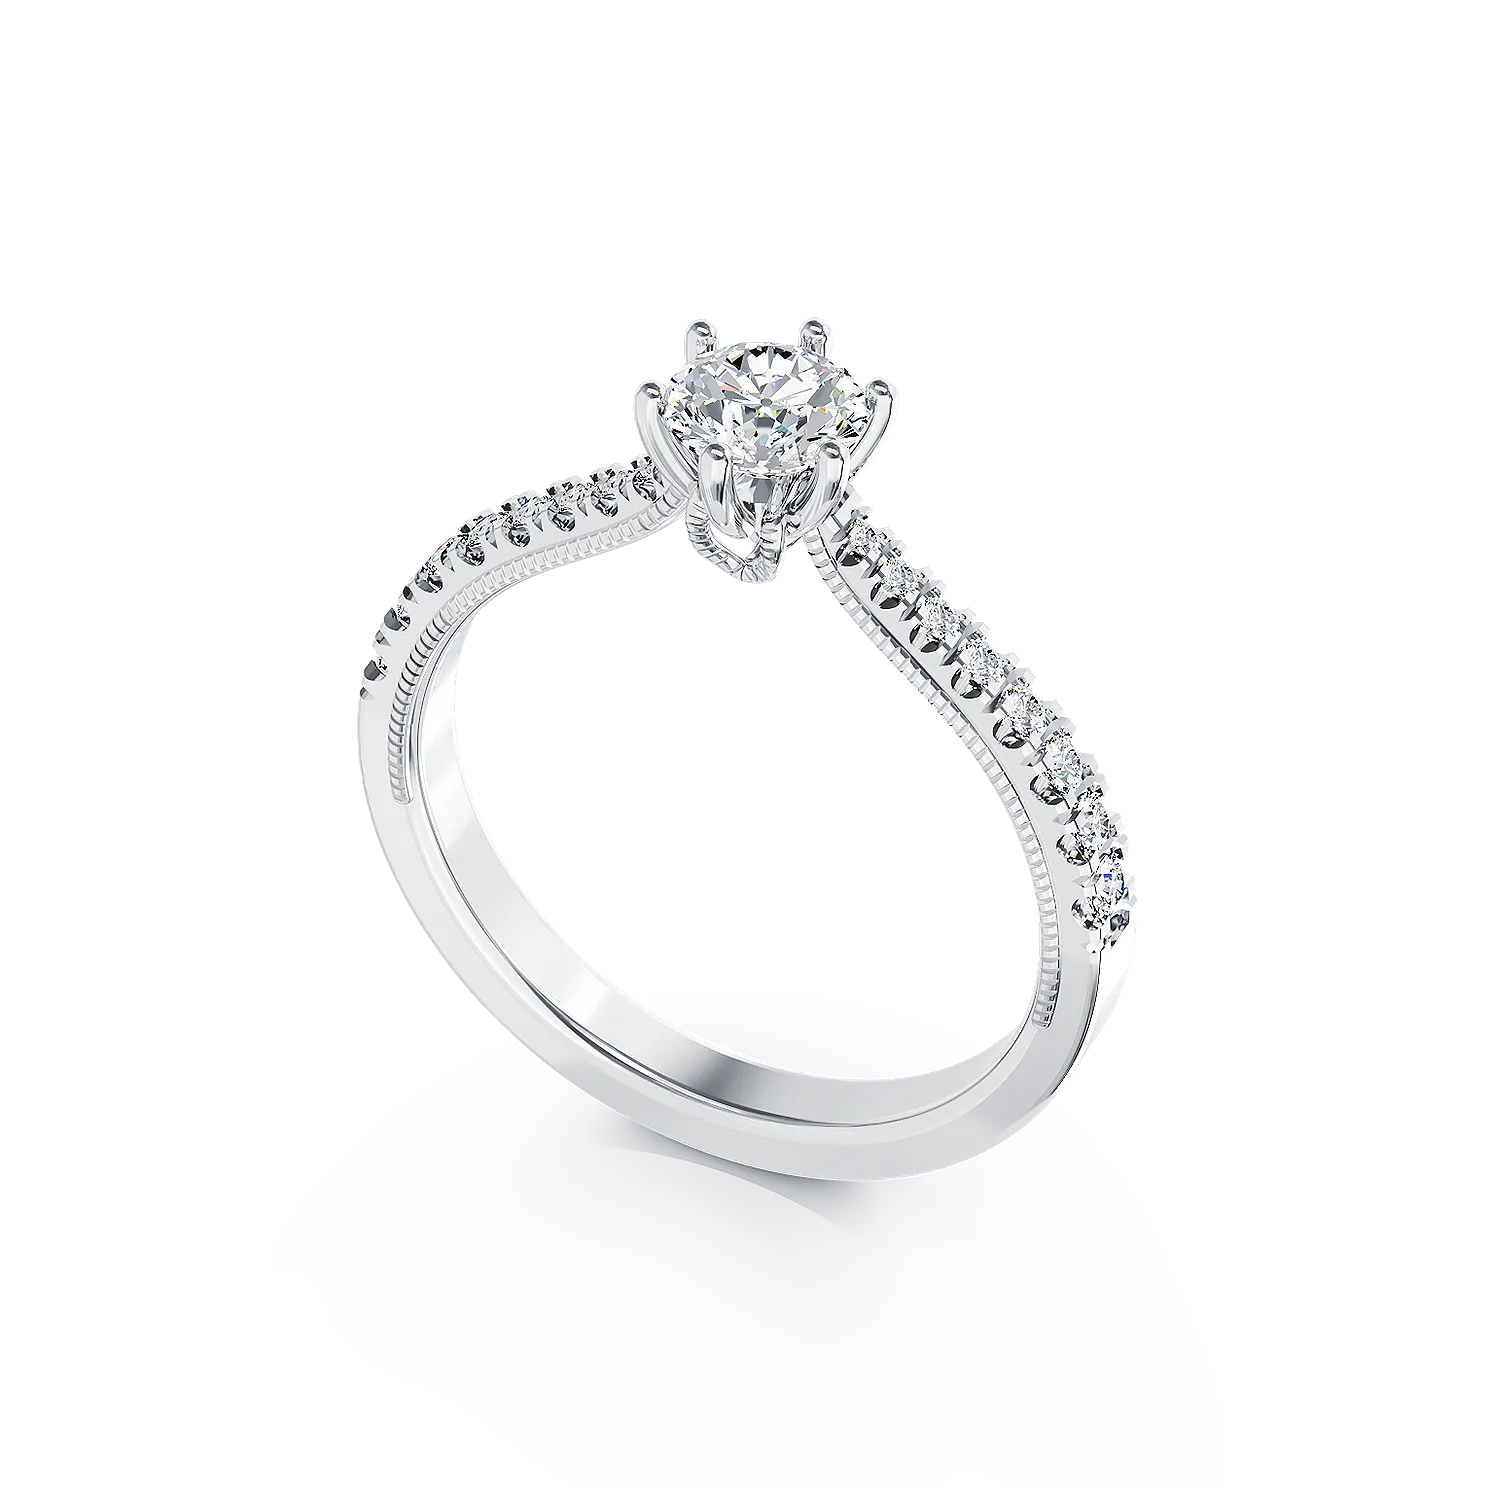 18K white gold engagement ring with 0.24ct diamond and 0.18ct diamonds